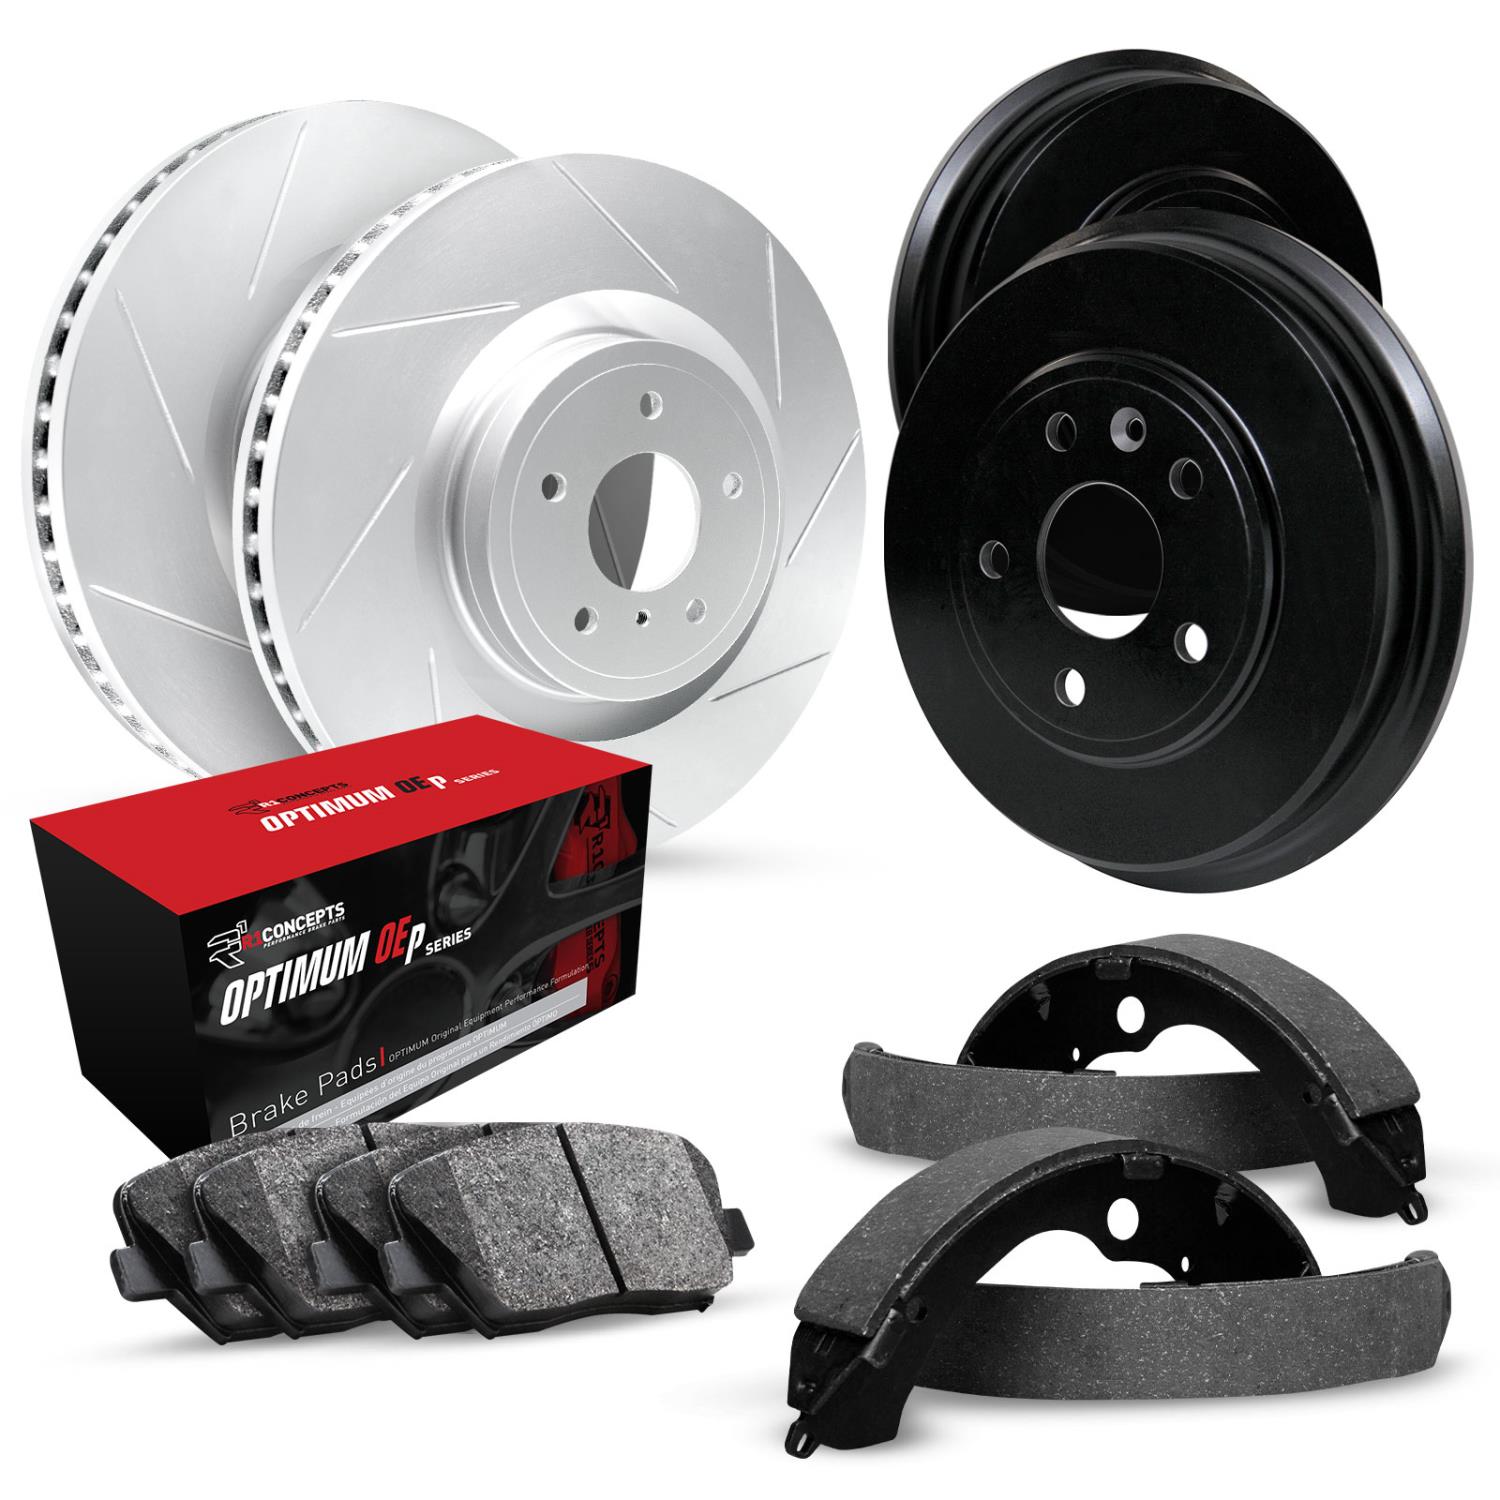 GEO-Carbon Slotted Brake Rotor & Drum Set w/Optimum OE Pads & Shoes, 1998-2002 Ford/Lincoln/Mercury/Mazda